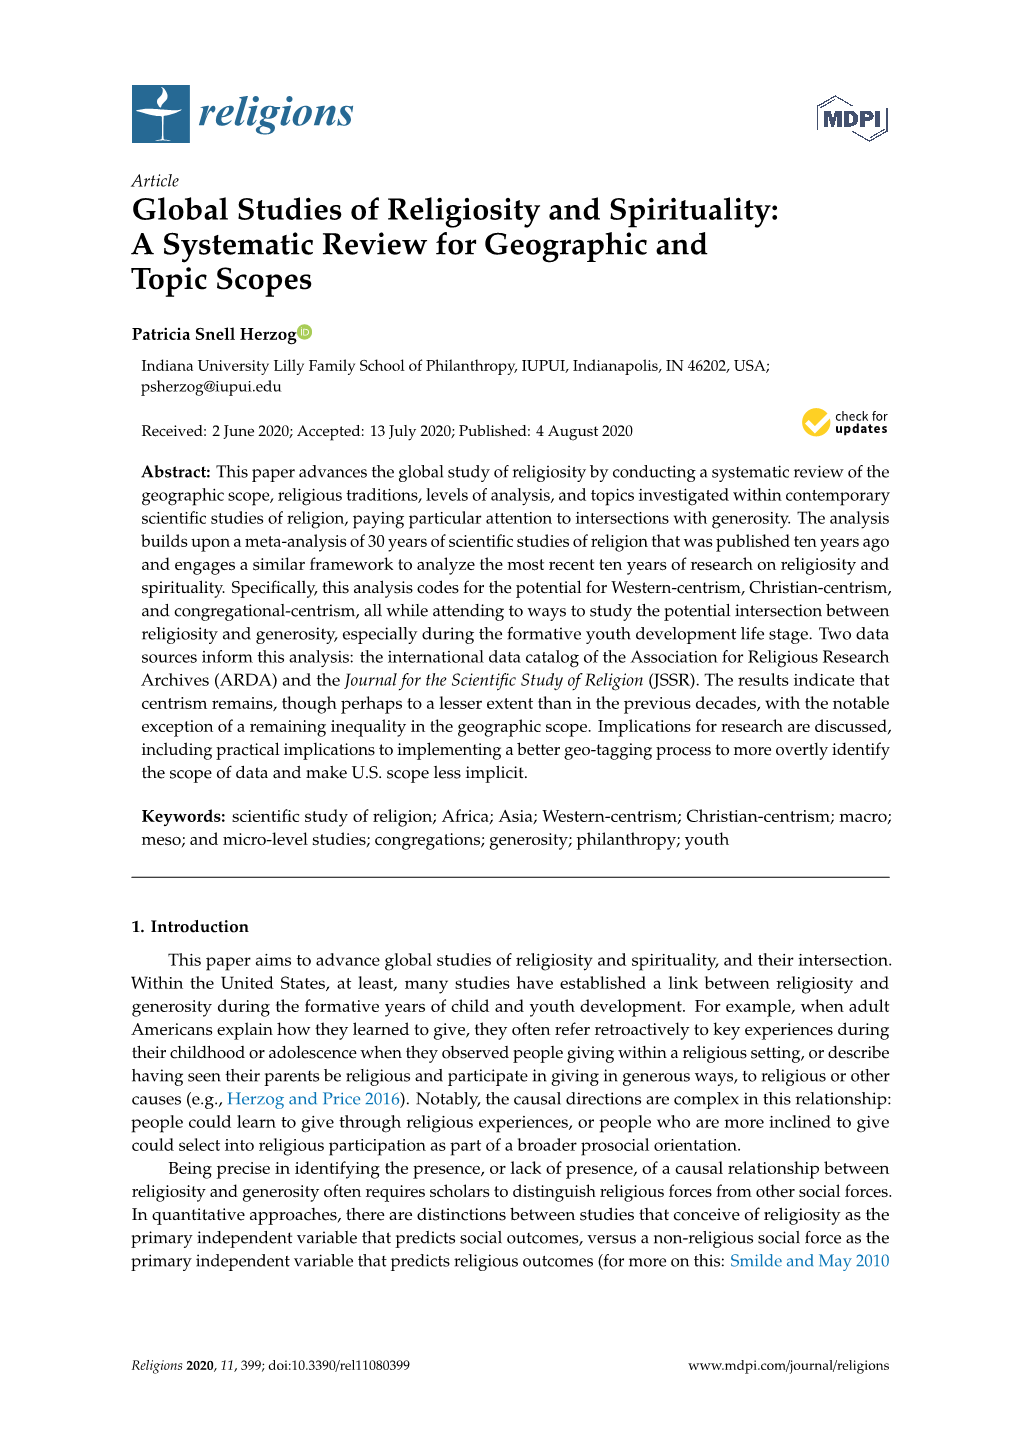 A Systematic Review for Geographic and Topic Scopes